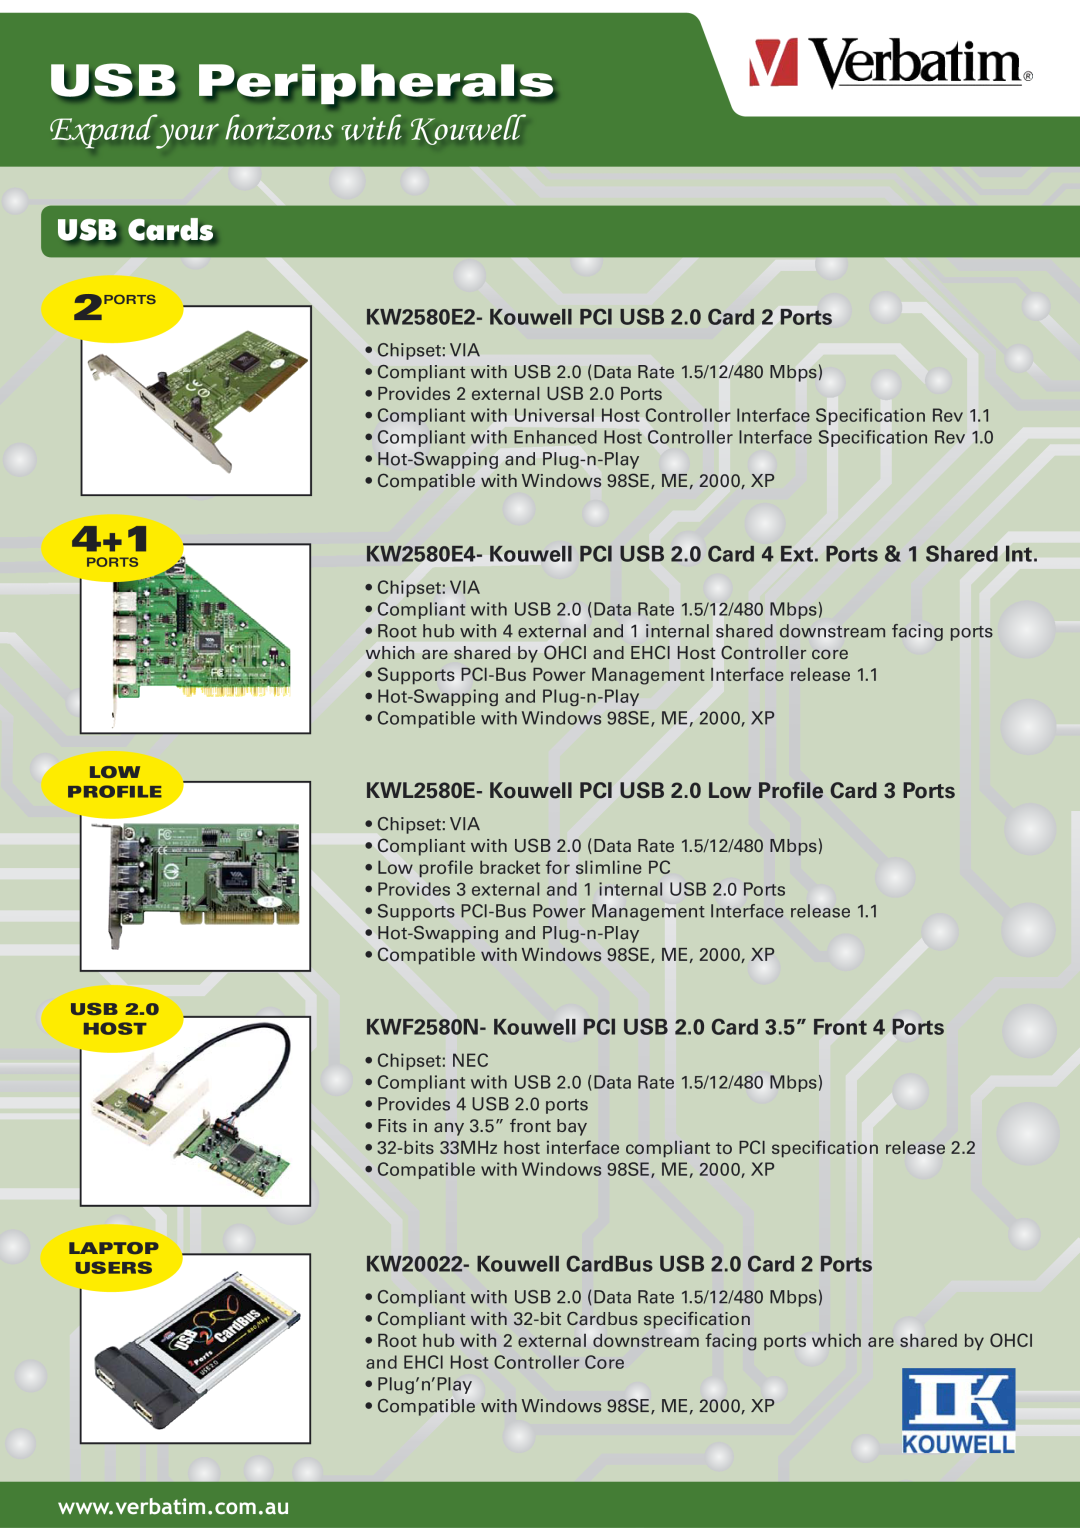 Verbatim KWL2580E, KW20022, KW2580E4, KW2580E2, KWF2580N manual USB Peripherals, Expand your horizons with Kouwell, USB Cards 